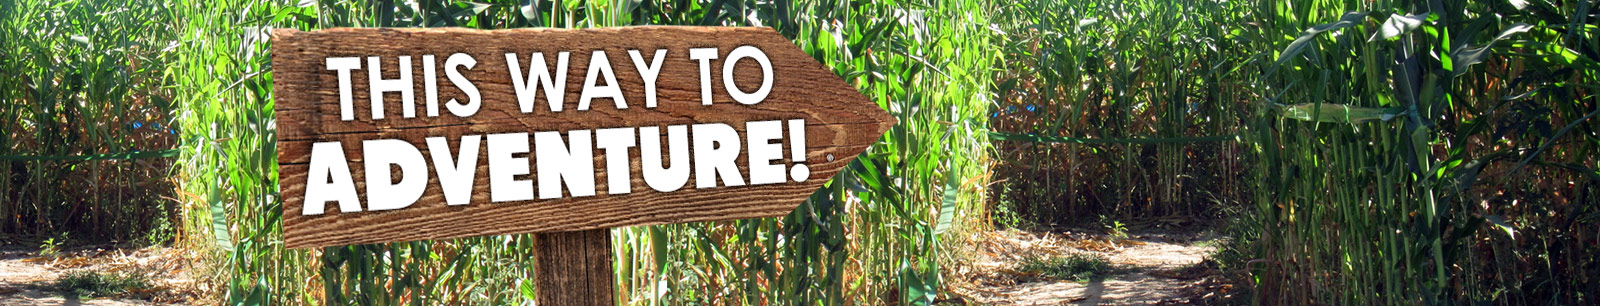 Outdoor adventure at a Maize Quest farm and corn maze near you